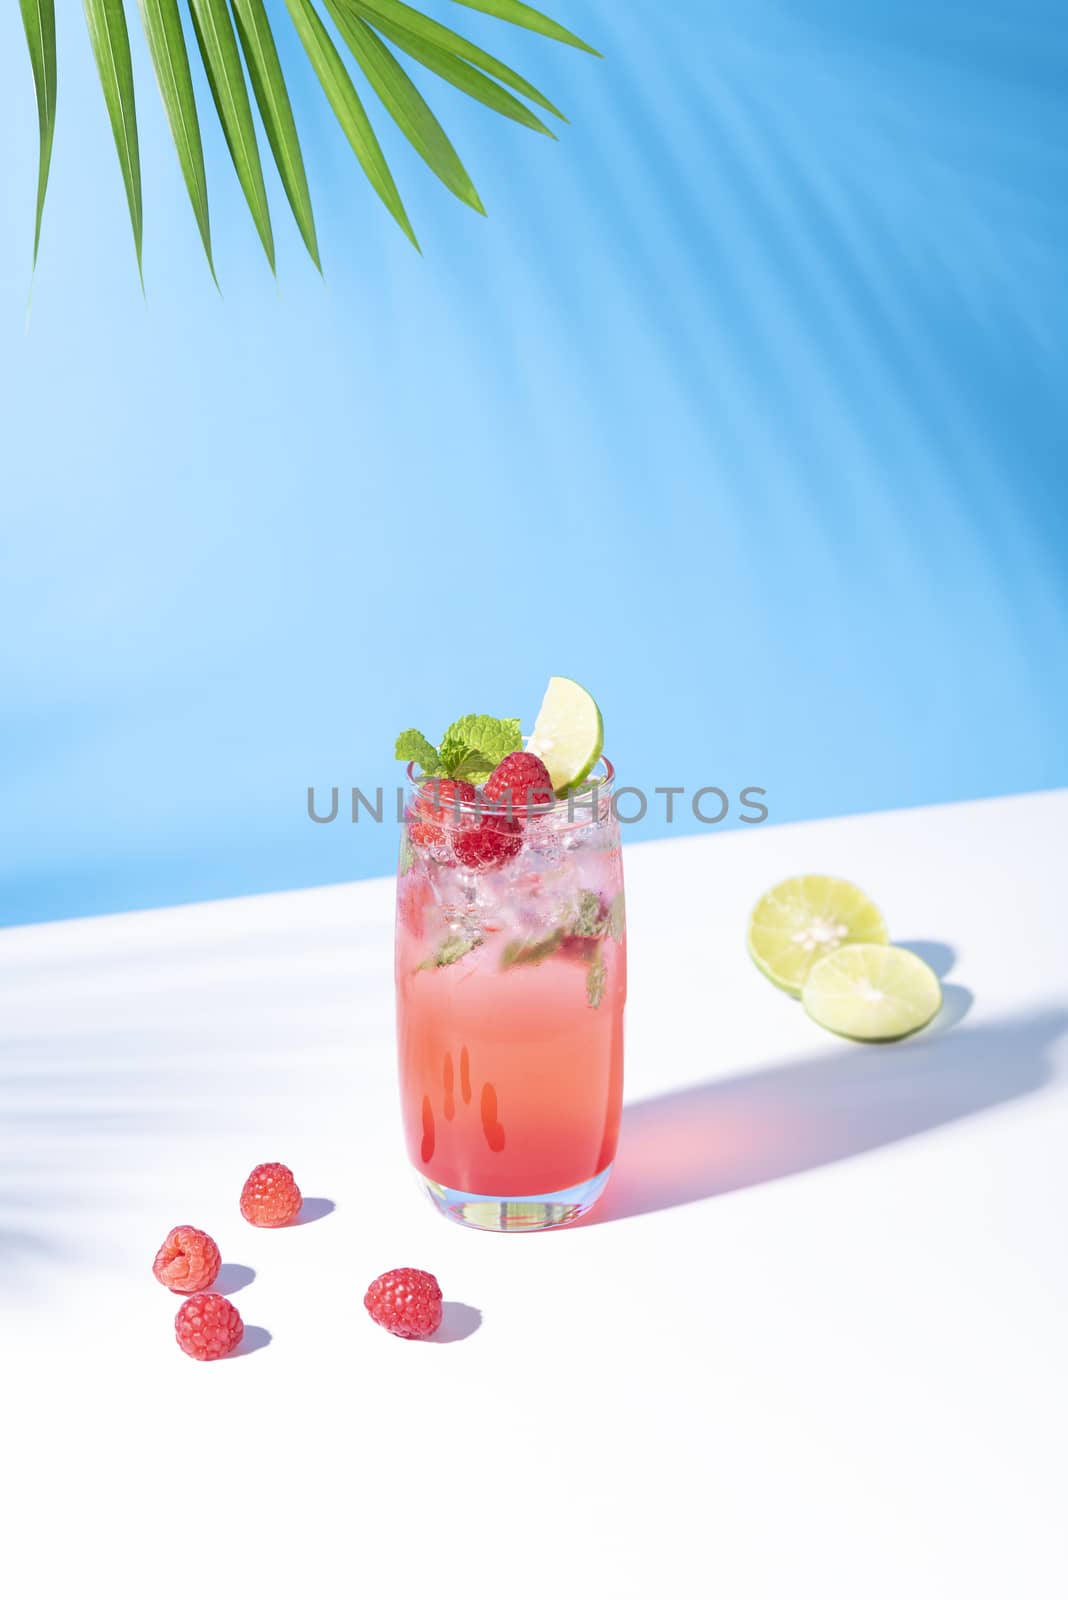 iced red raspberry punch cocktail with lime in glass on blue background. summer drink.